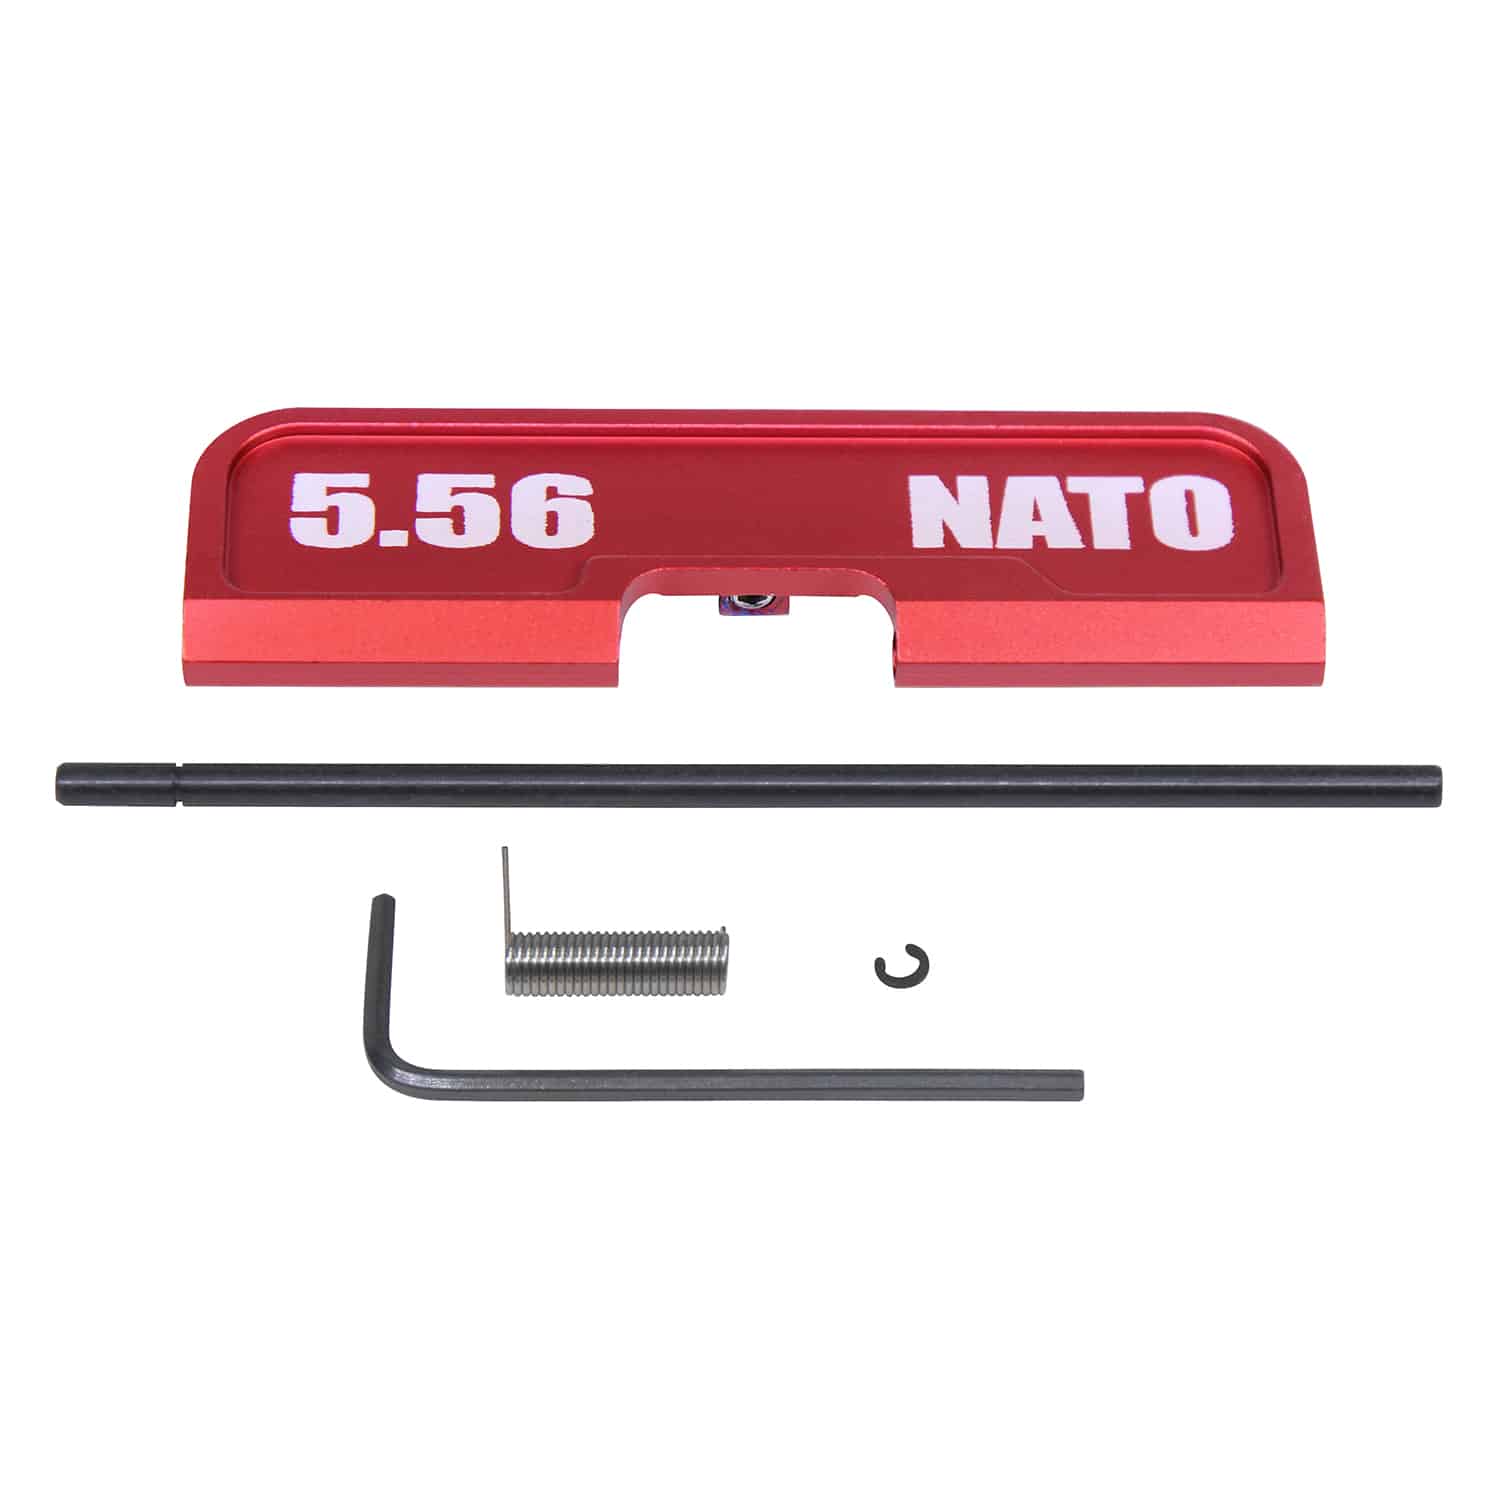 AR-15 Ejection Port Dust Cover Gen 3 '5.56 NATO' Lasered in Anodized Red